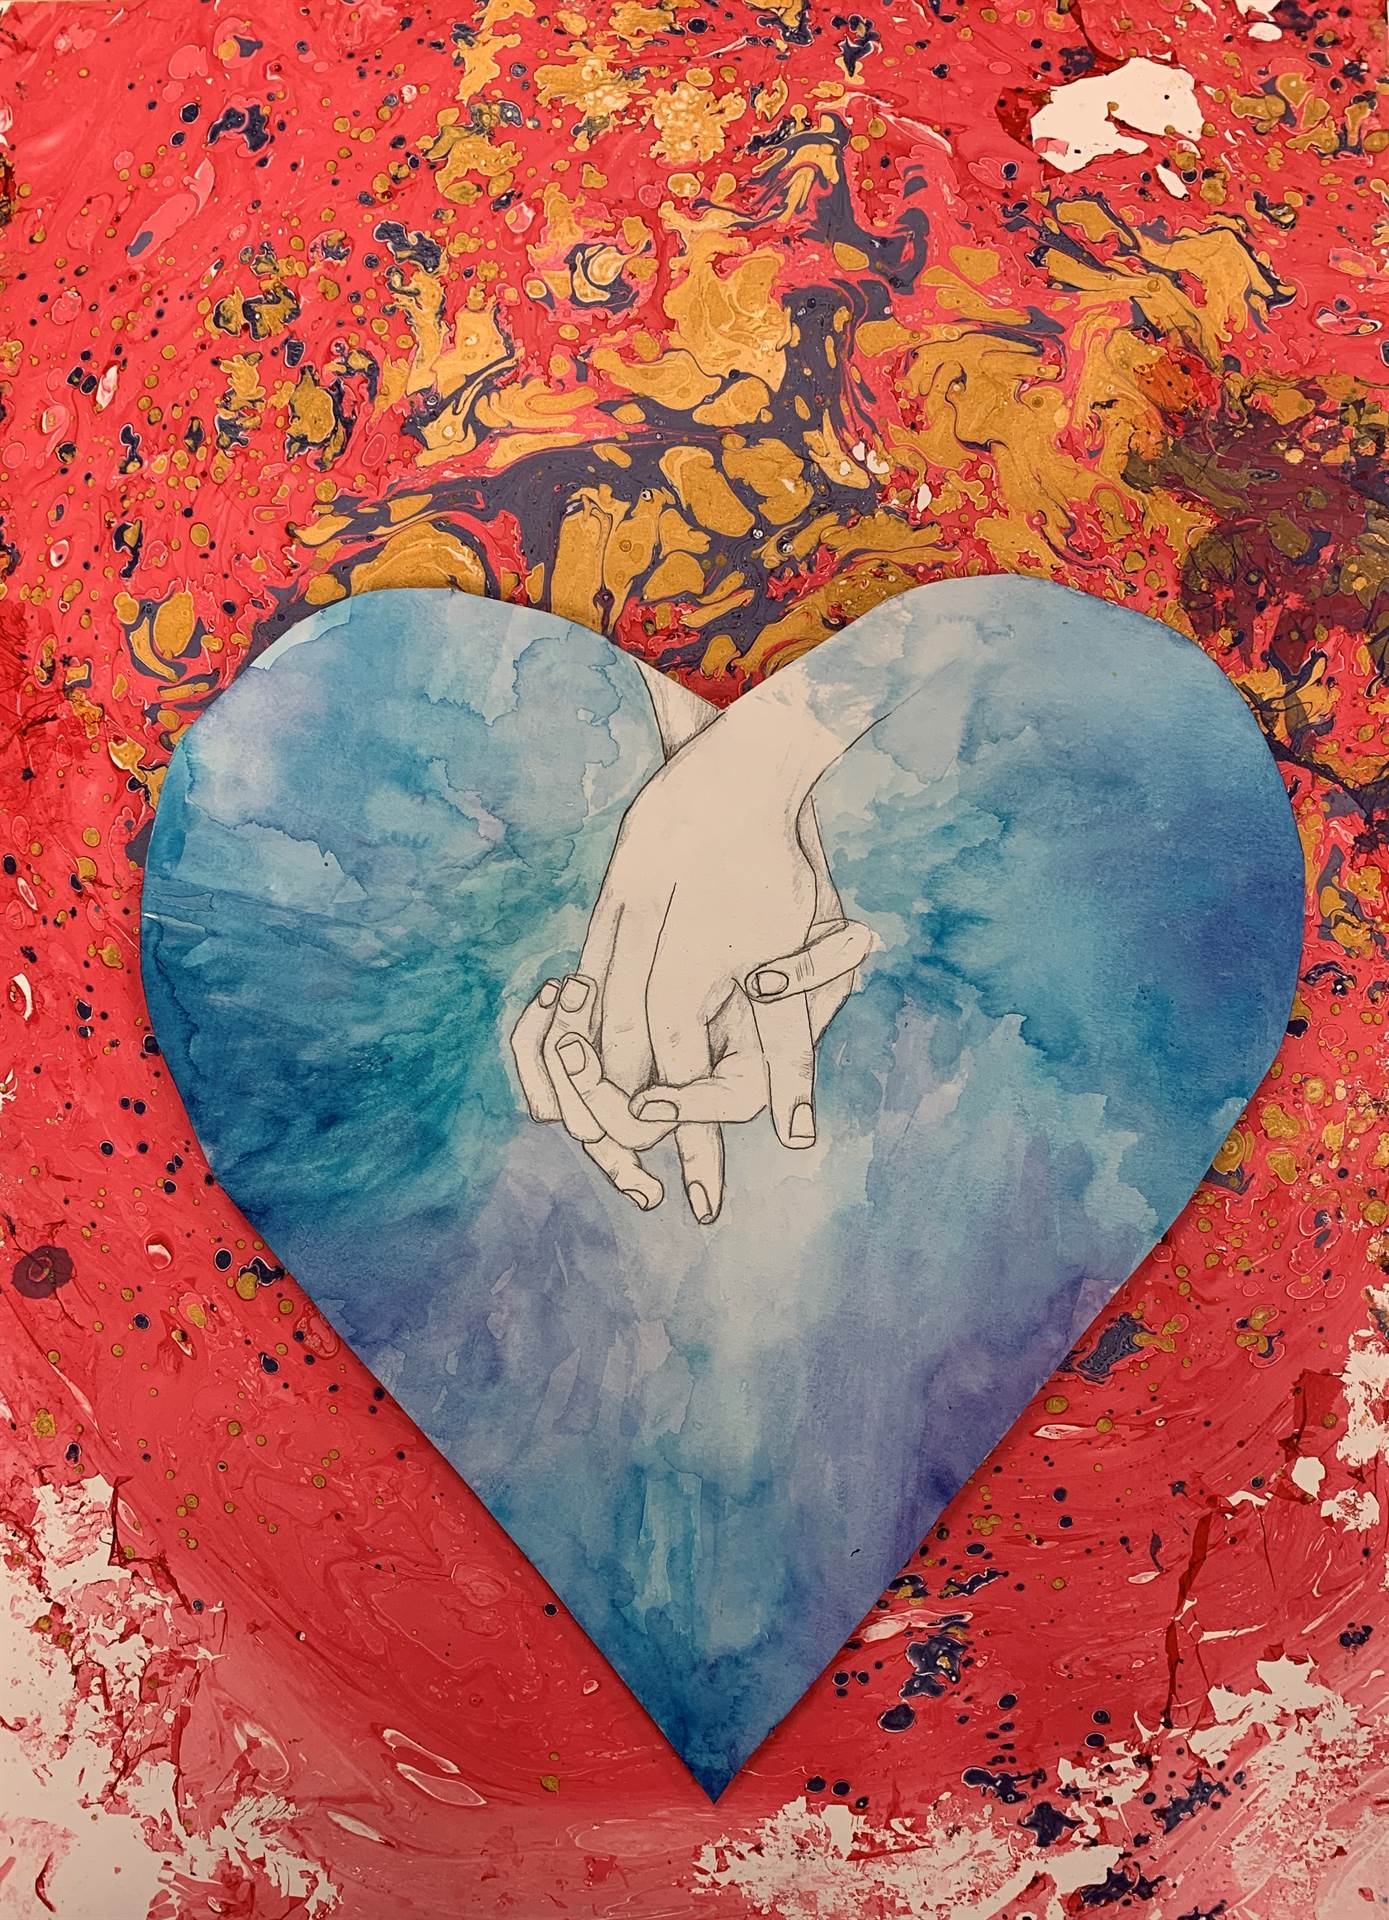 Drawing of Heart and Hands